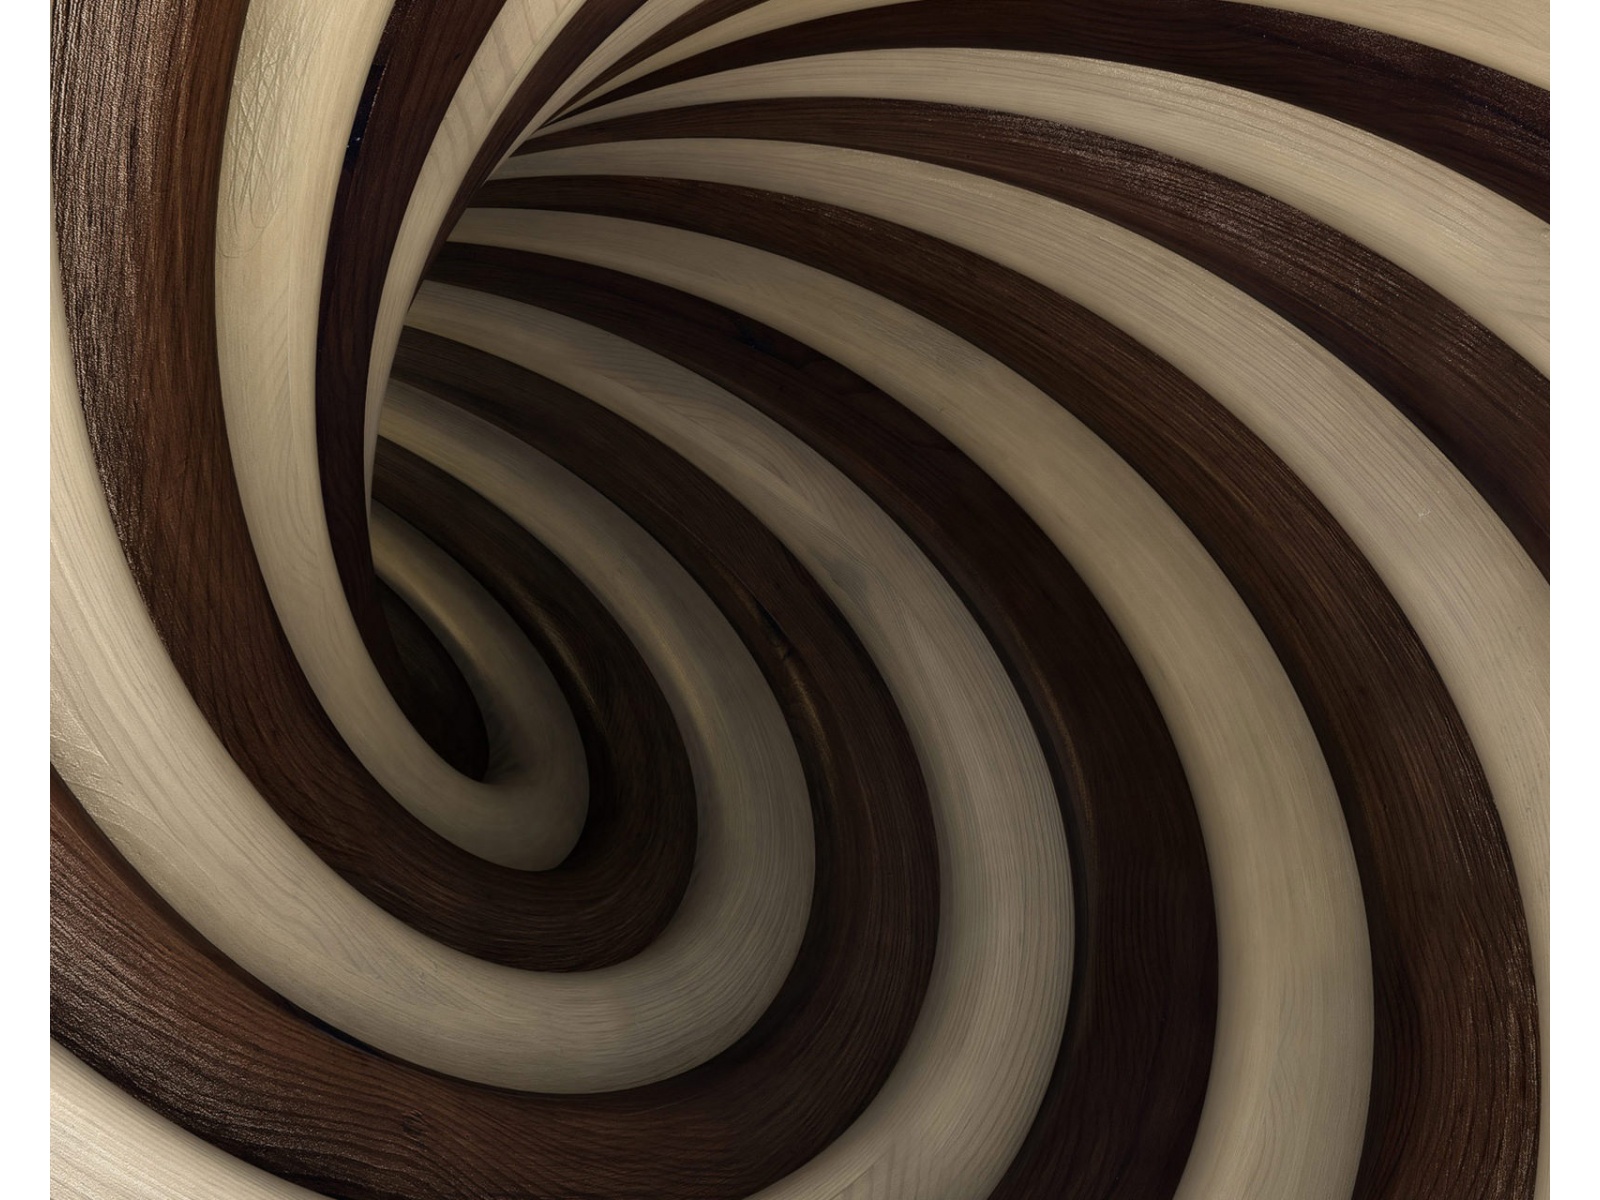 Wood Abstract